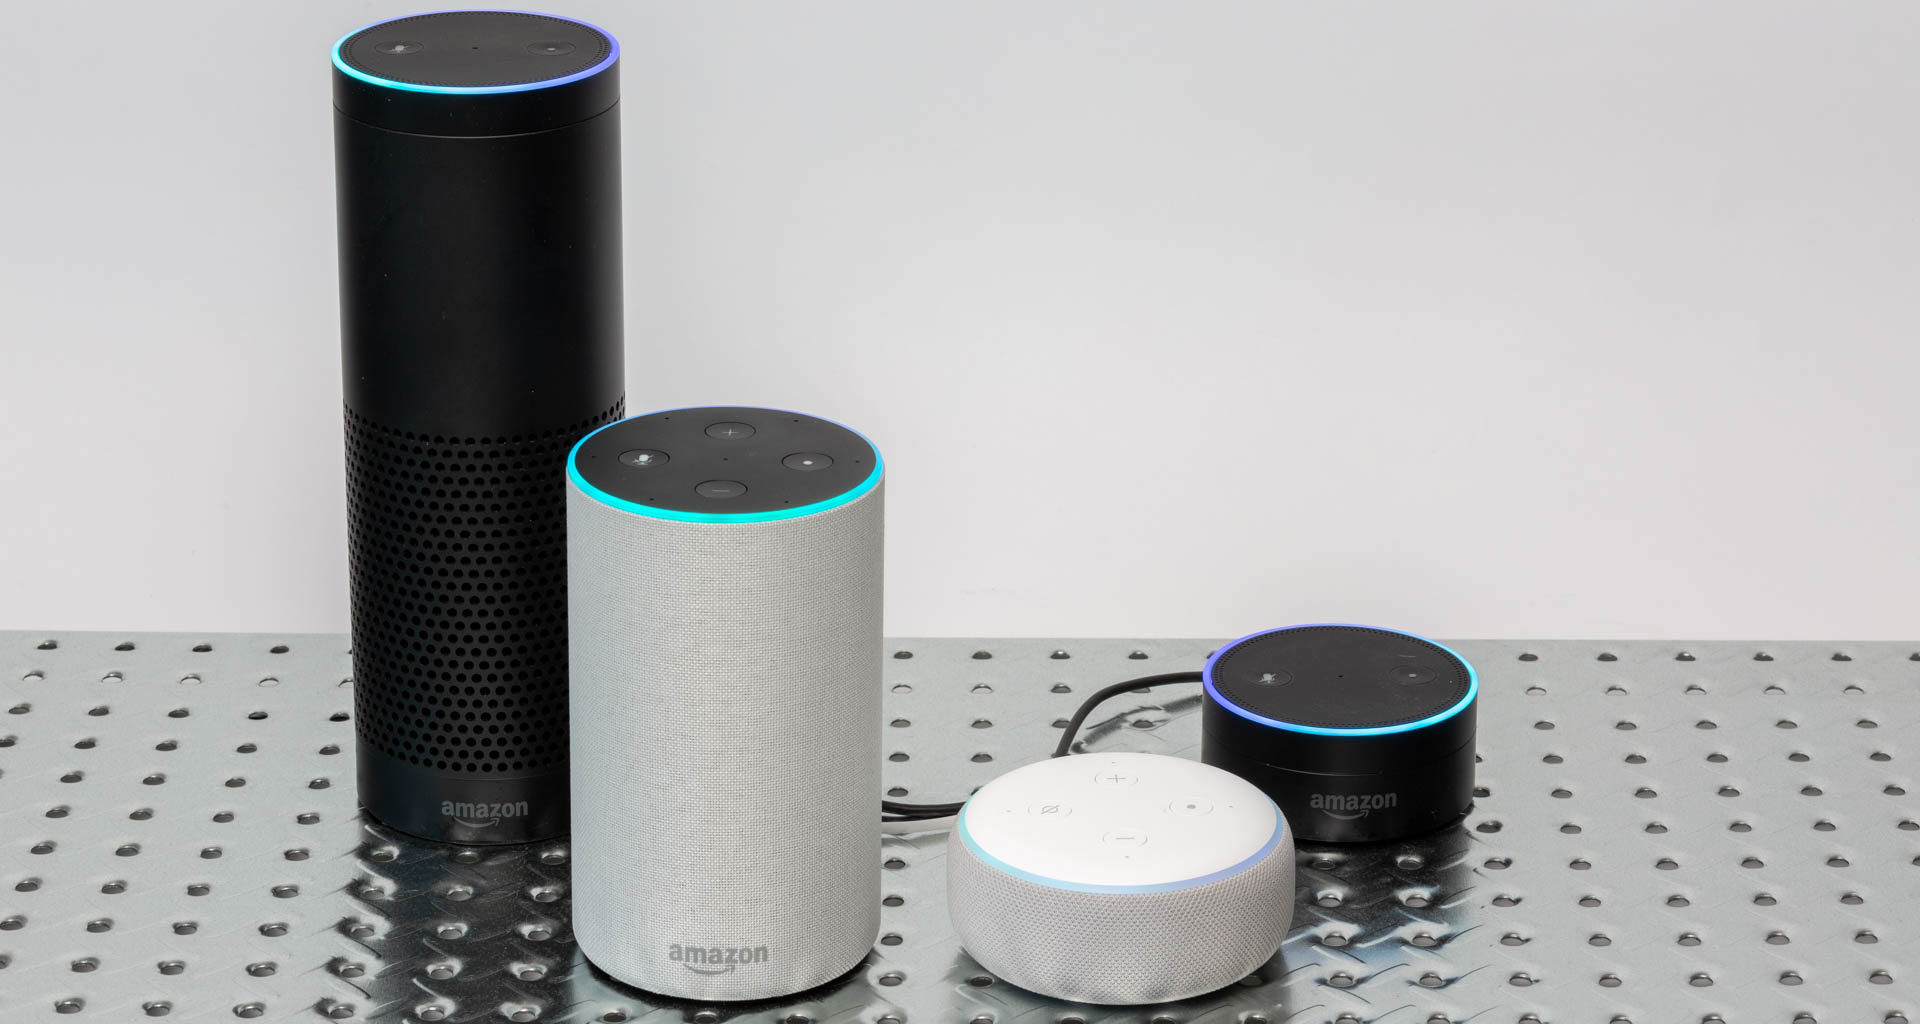 Alexa runs on the entire Amazon Echo speaker line, including these products (left to right): Echo (1st generation), Echo (2nd generation), Echo Dot (3rd generation), and Echo Dot (2nd generation). Image: Digitized House Media.